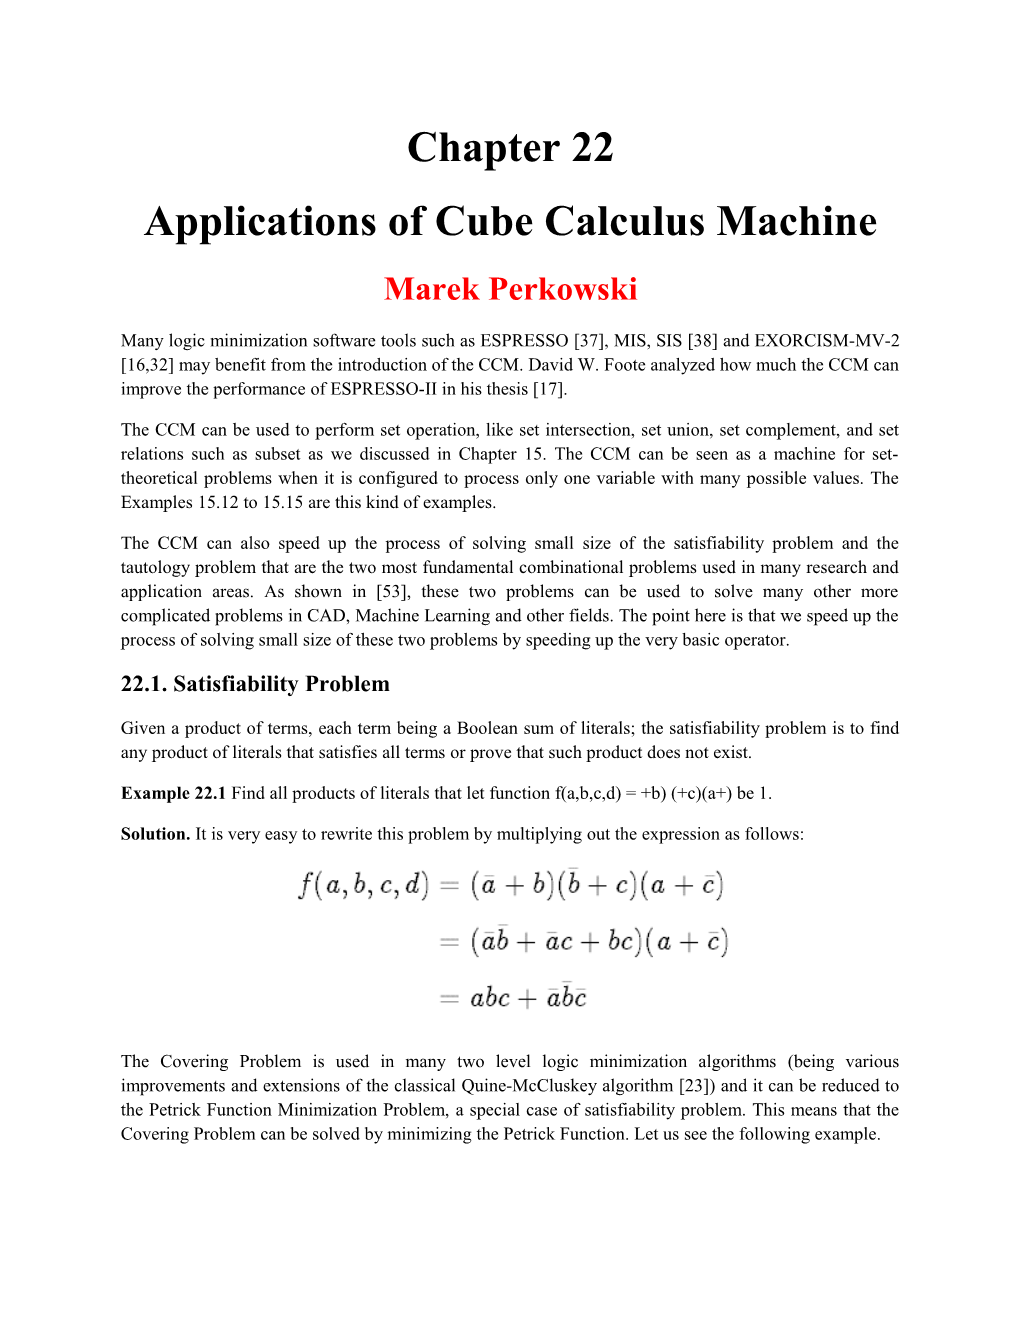 Applications of Cube Calculus Machine